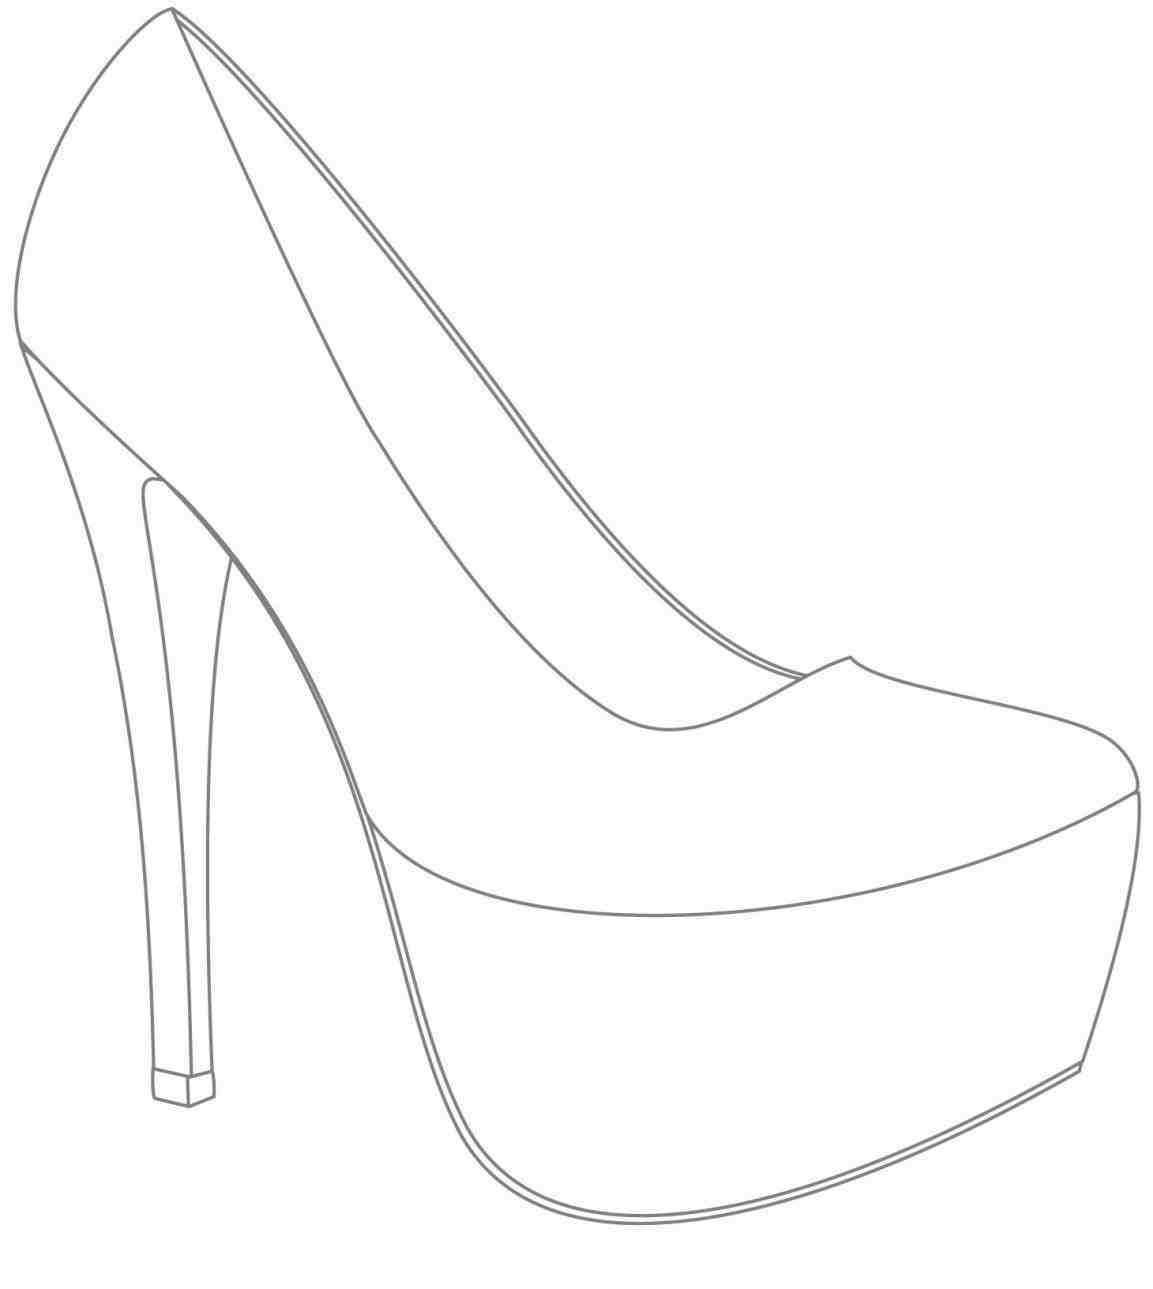 High Heel Drawing Template At Paintingvalley | Explore For High Heel Template For Cards